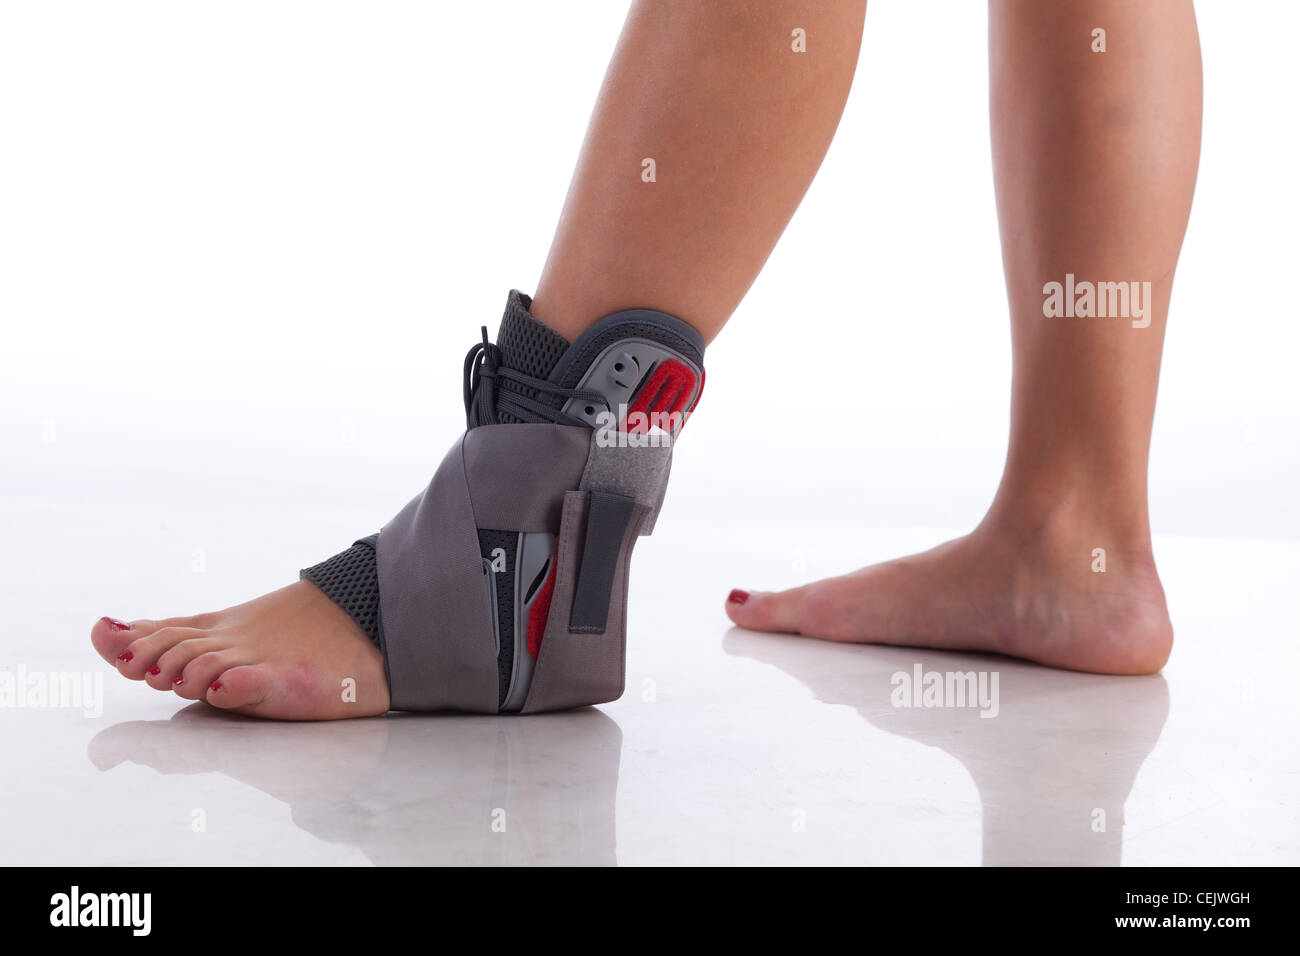 Foot Wrapped in a Ankle Brace on White with reflection Stock Photo